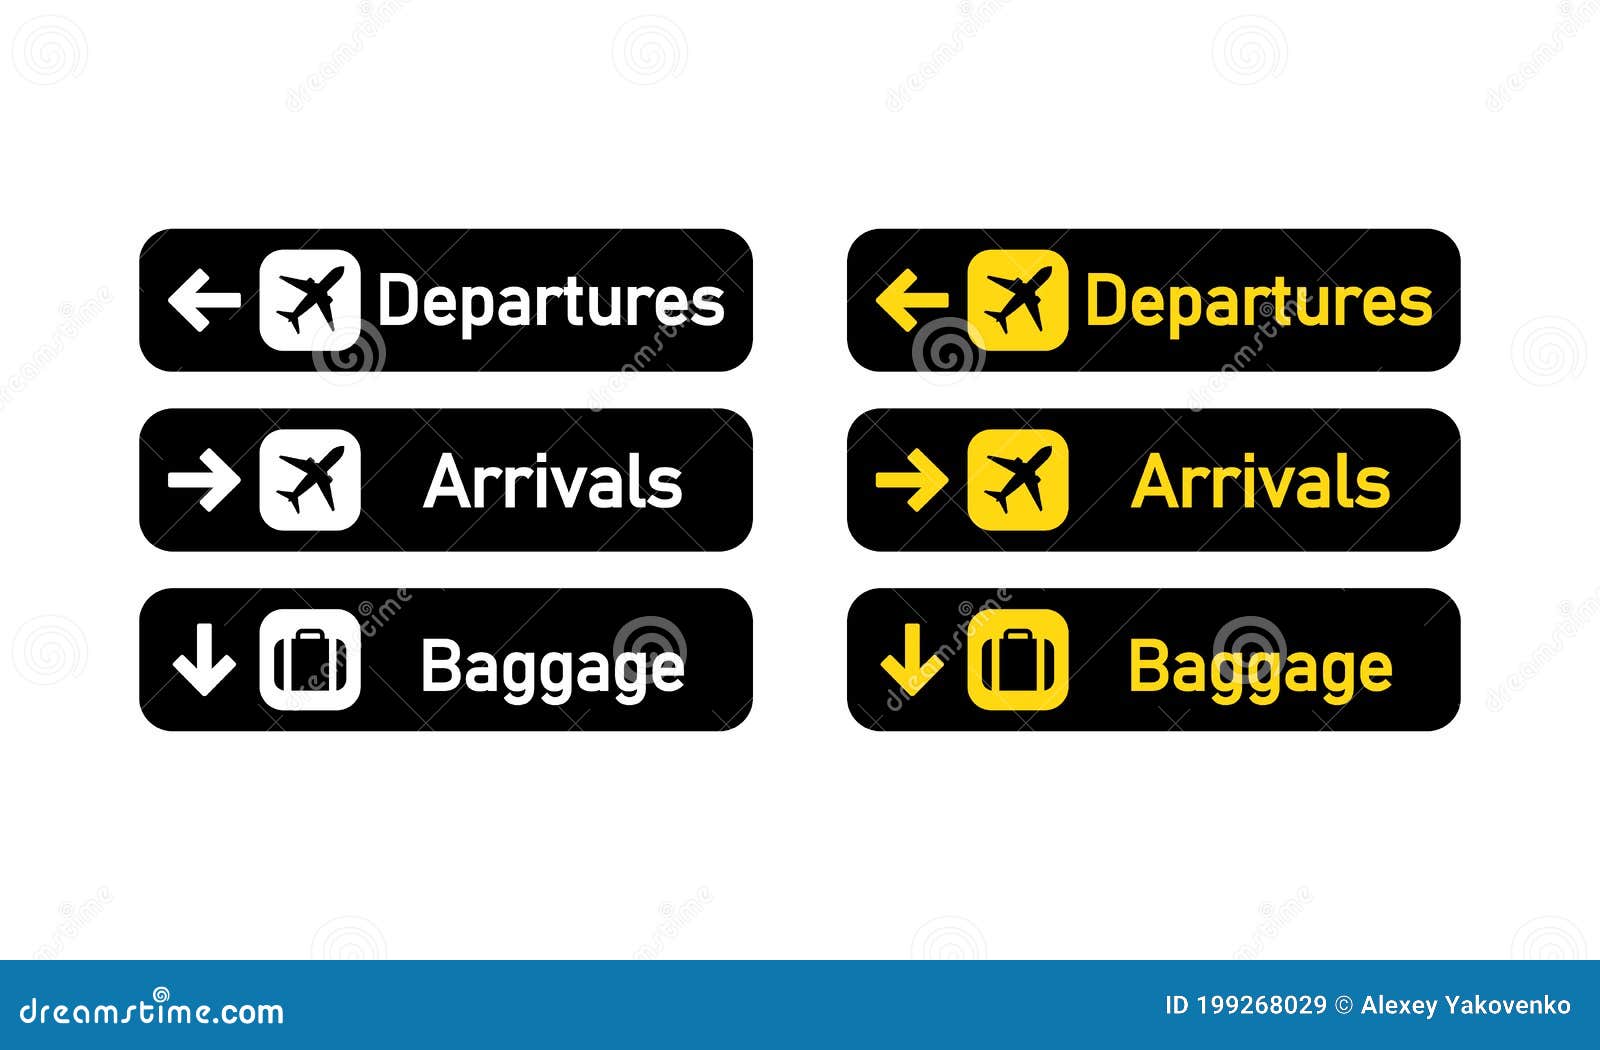 departures, arrivals and baggage sign. airport sign.  on  white background. eps 10